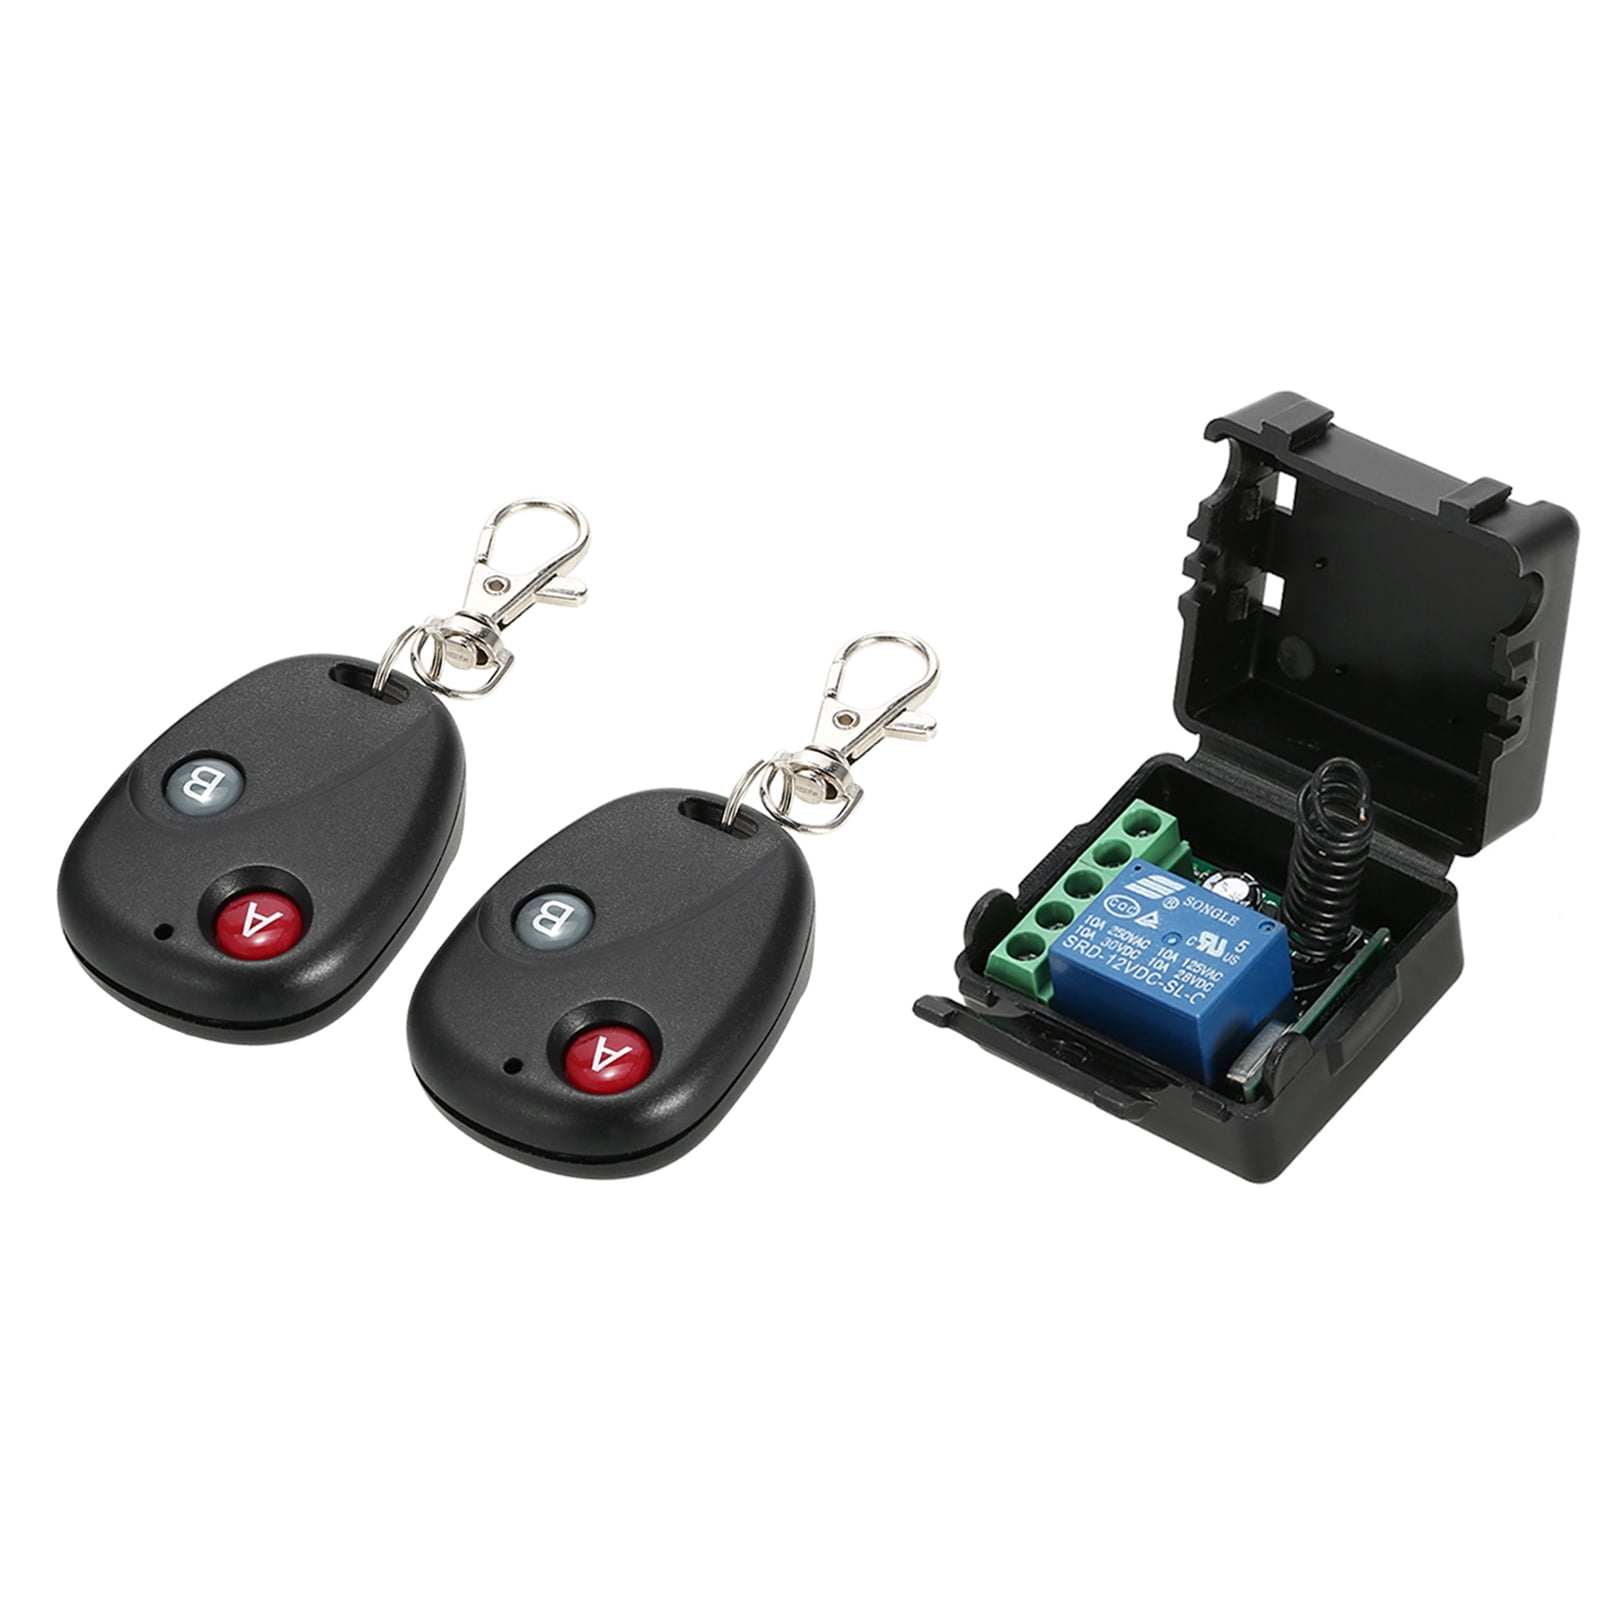 Briidea 12 Volt Wireless Remote Control Switch for Agricultural Sprayers, Spray Pumps